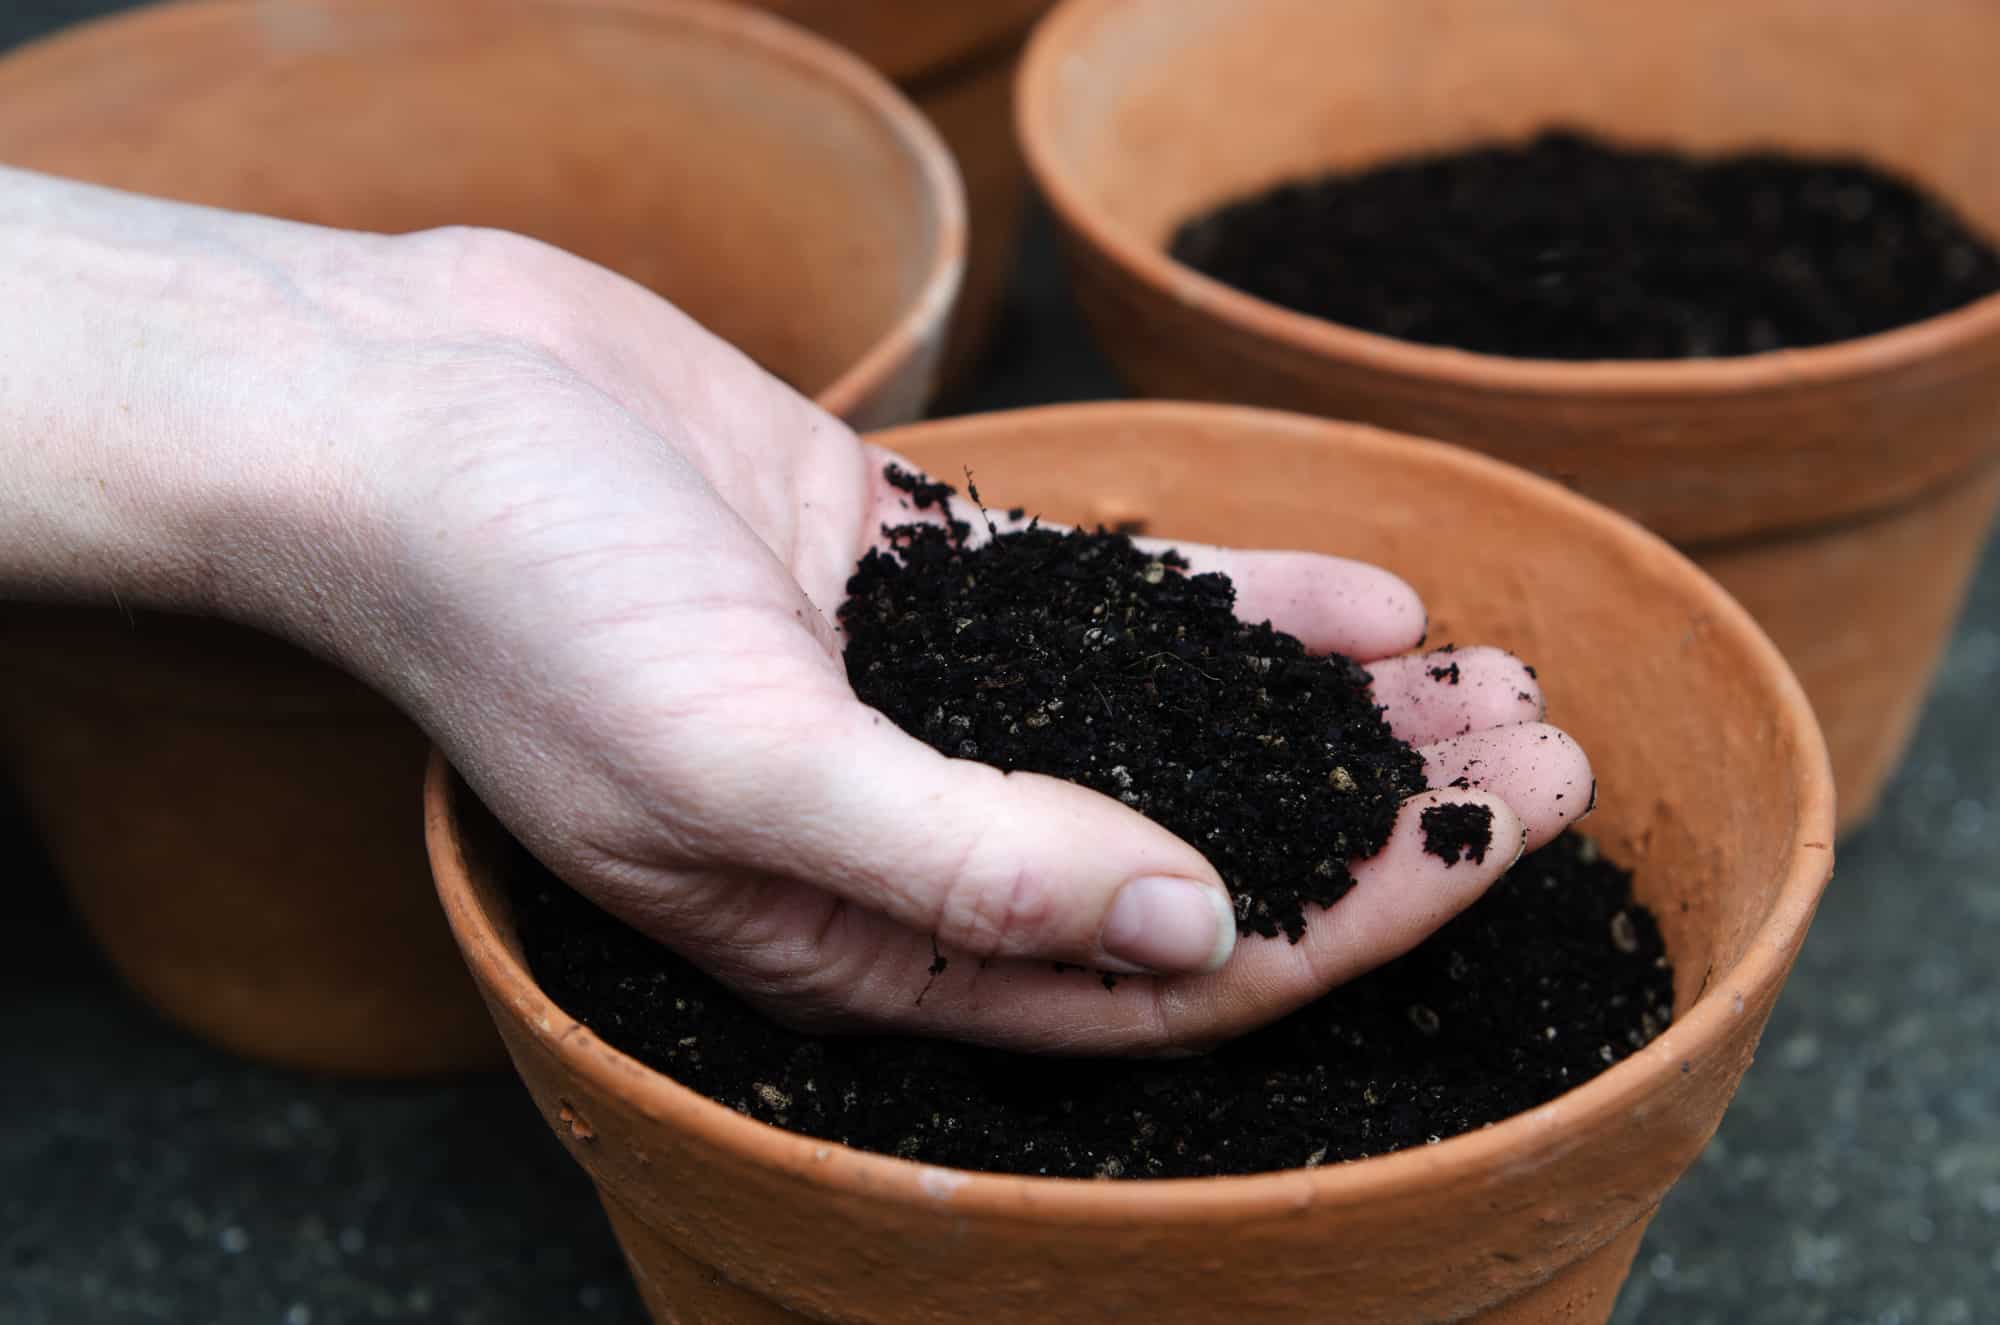 Does Potting Soil Ever Expire? How Long Will It Last?